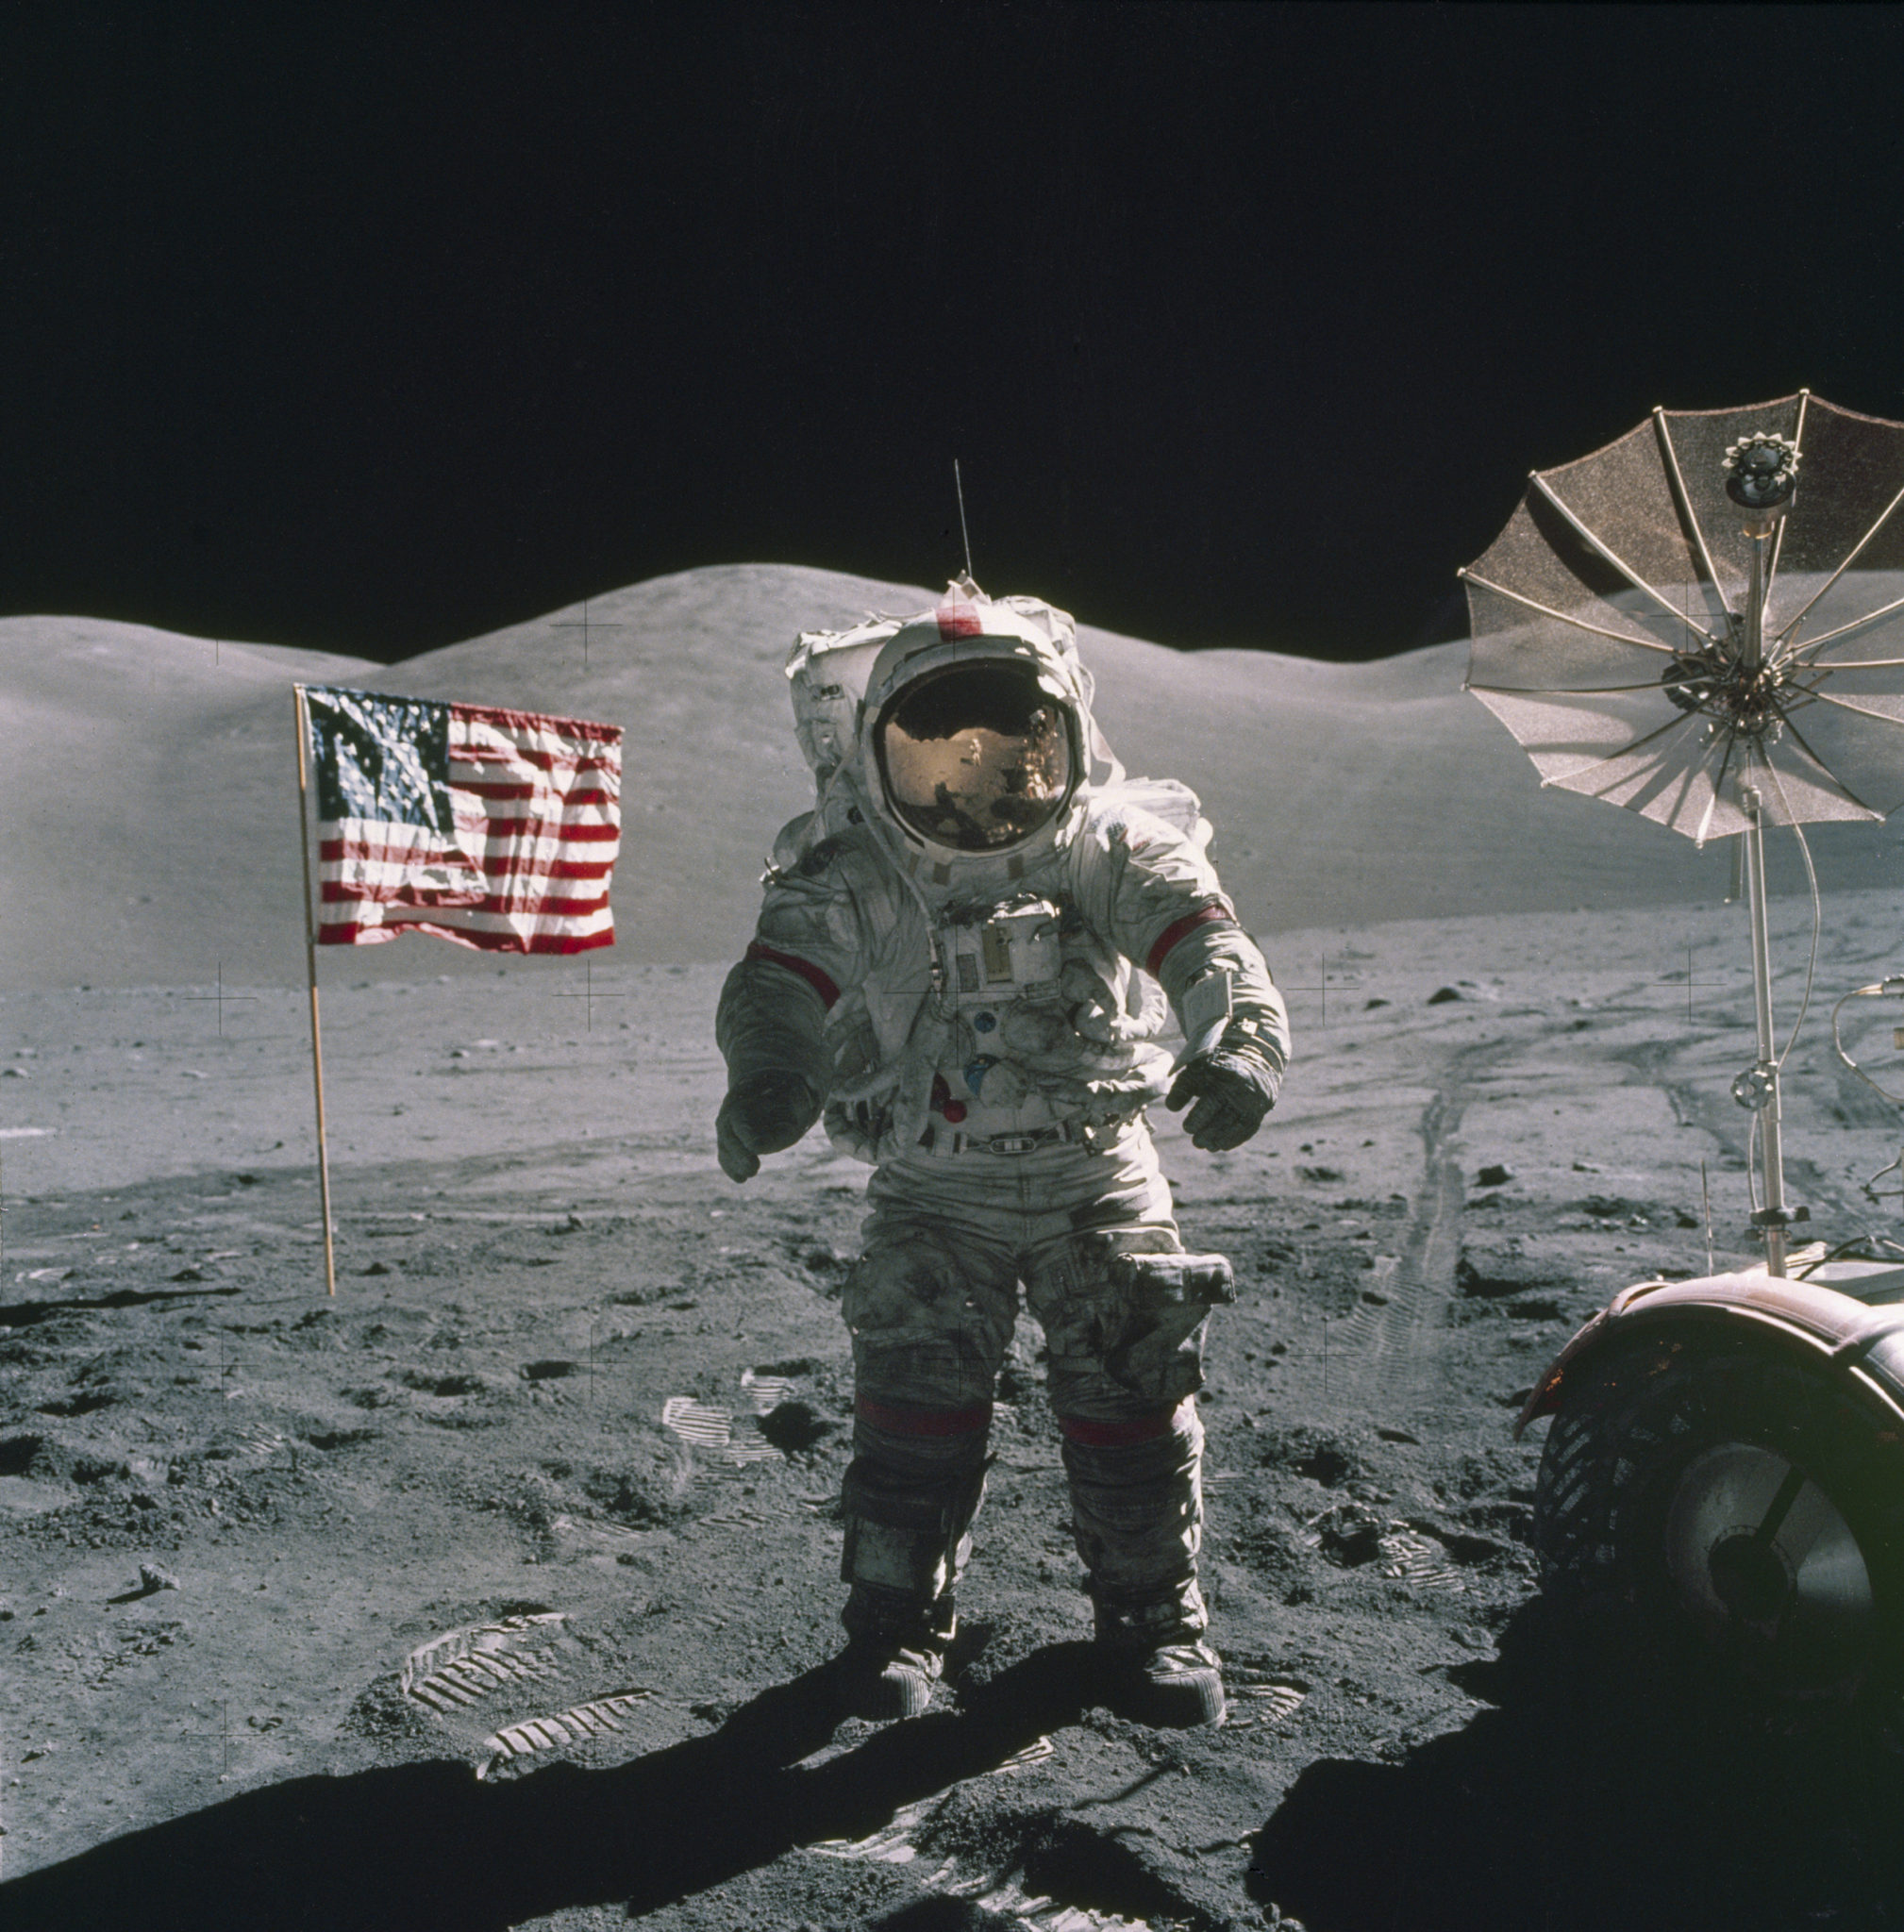 APOLLO 17 ASTRONAUT WITH AMERICAN FLAG ON MOON, DECEMBER 1972